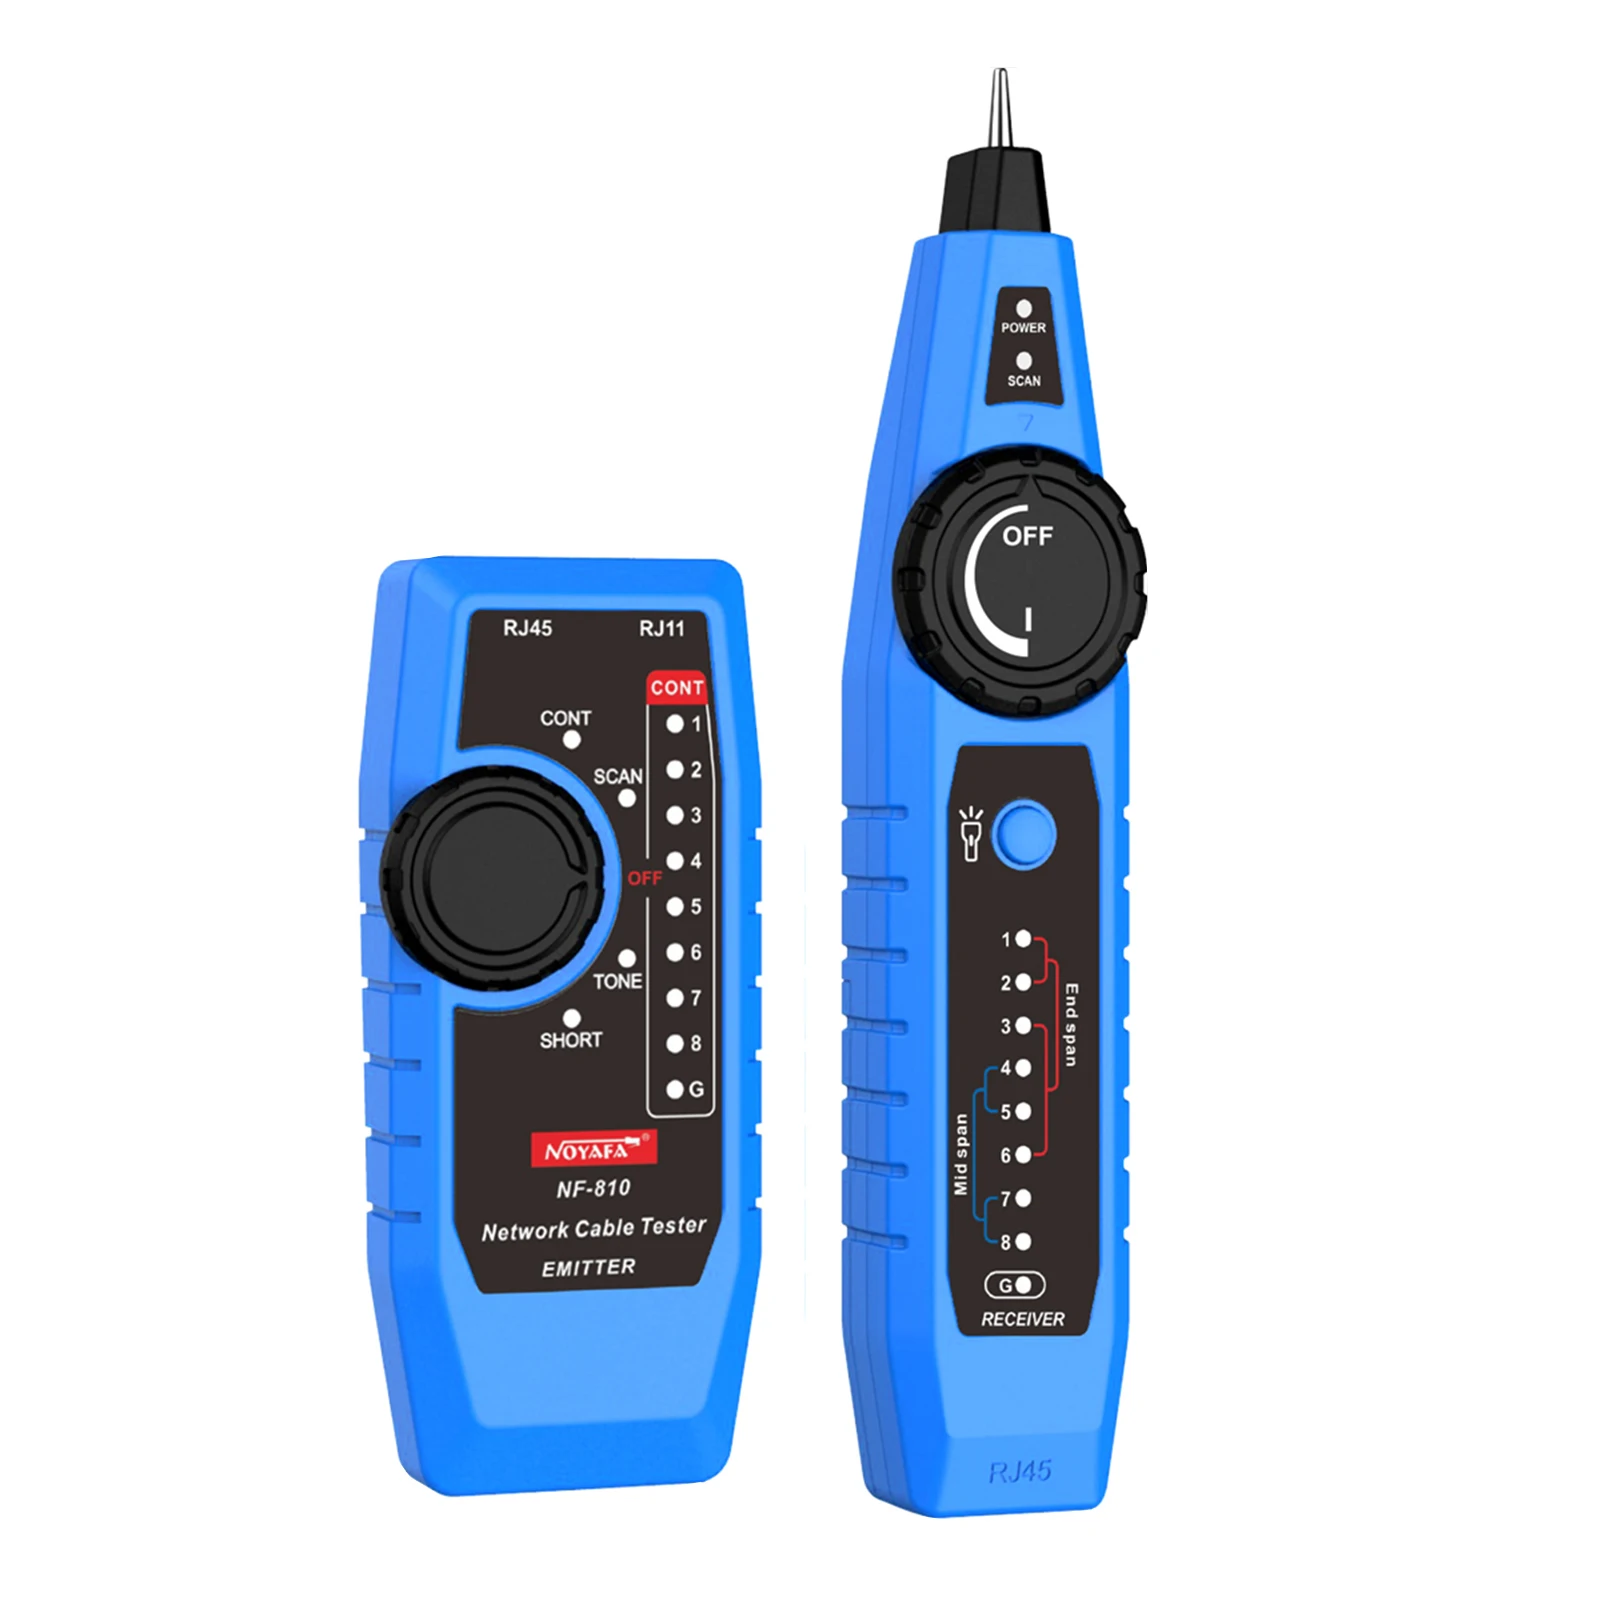 NOYAFA NF-810 Network Cable Tester Kit Multi Function Wire Tracker Wiremap PoE TEL Testing for RJ11 RJ45 CAT5 CAT6 LAN Cable cable wire toner tracer tester